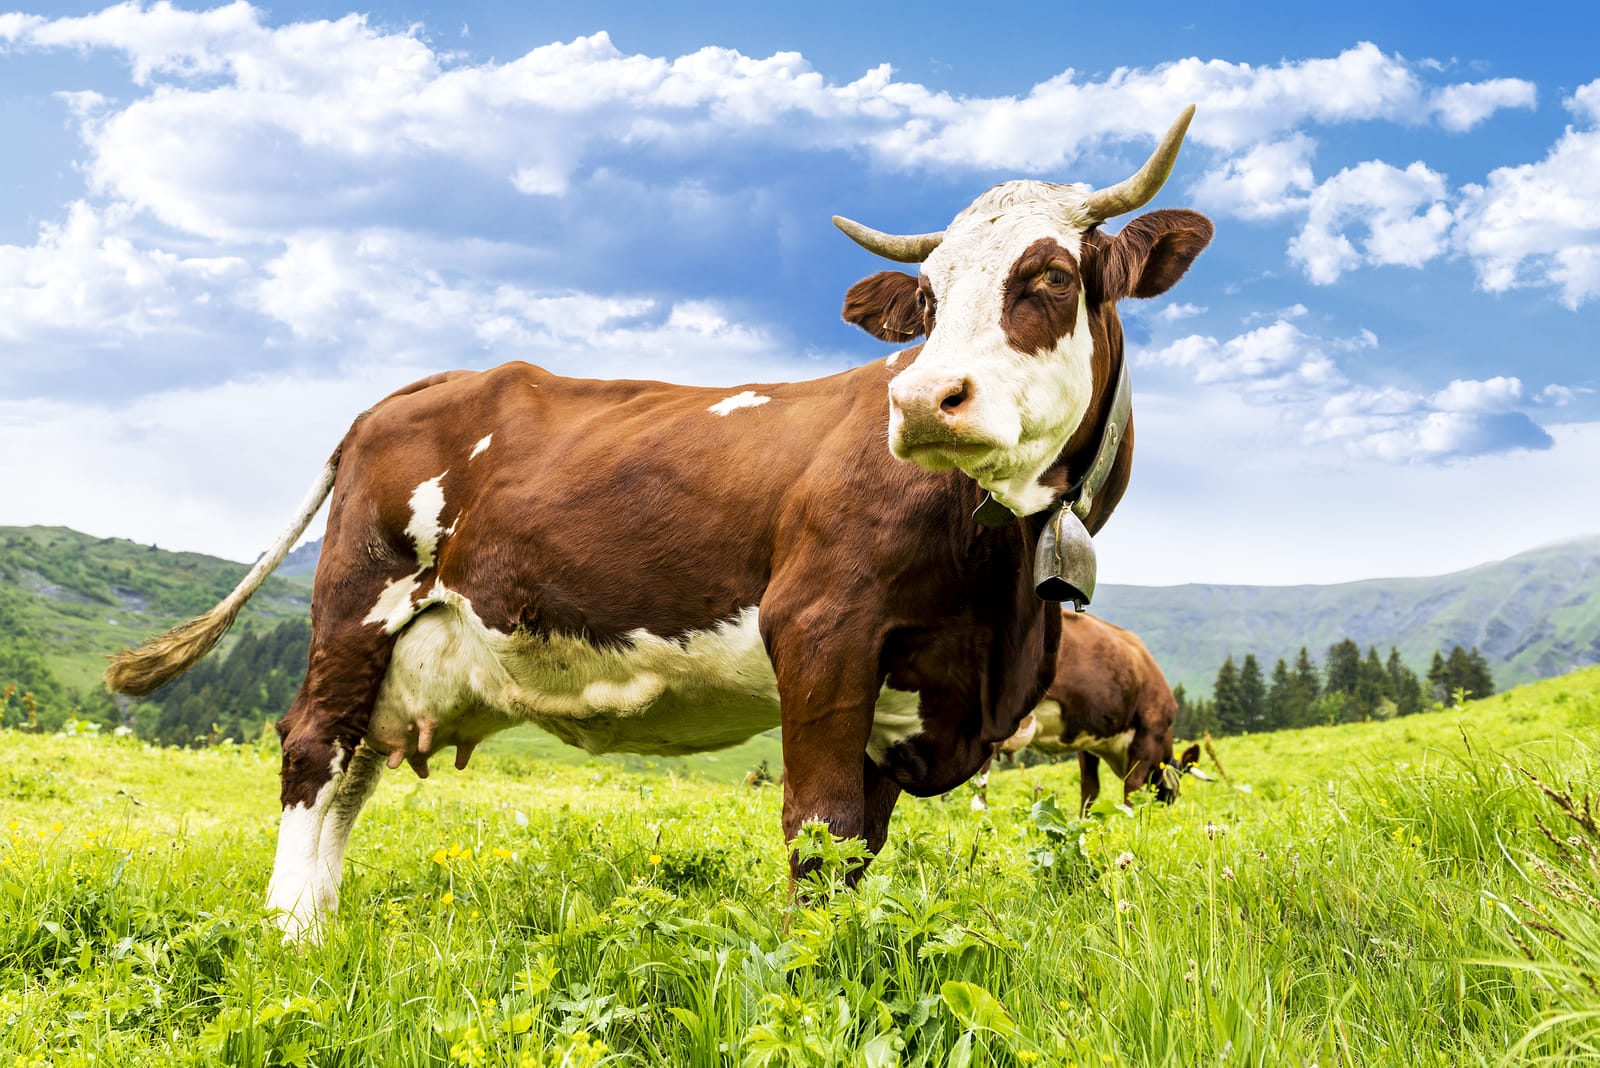 Cow Puns That’ll Tip You Over From Laughter